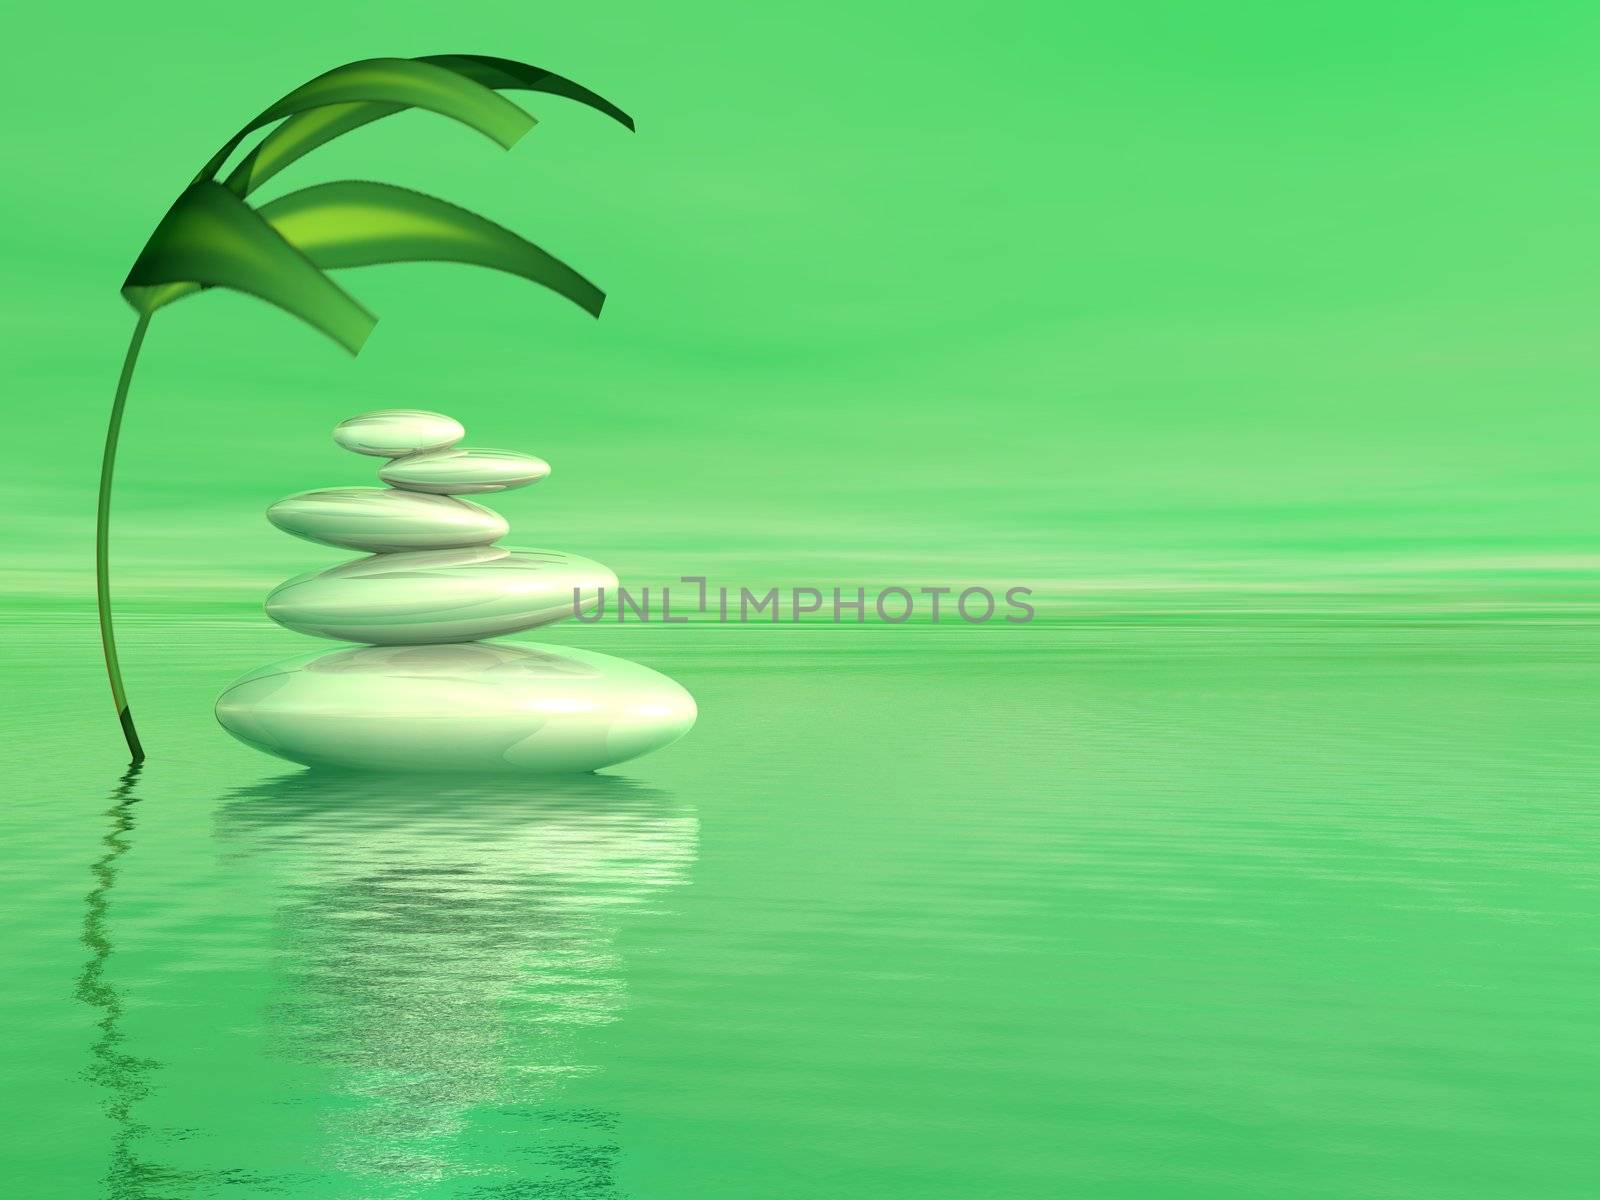 Balanced white stones upon the ocean and under a covering plant in a green background